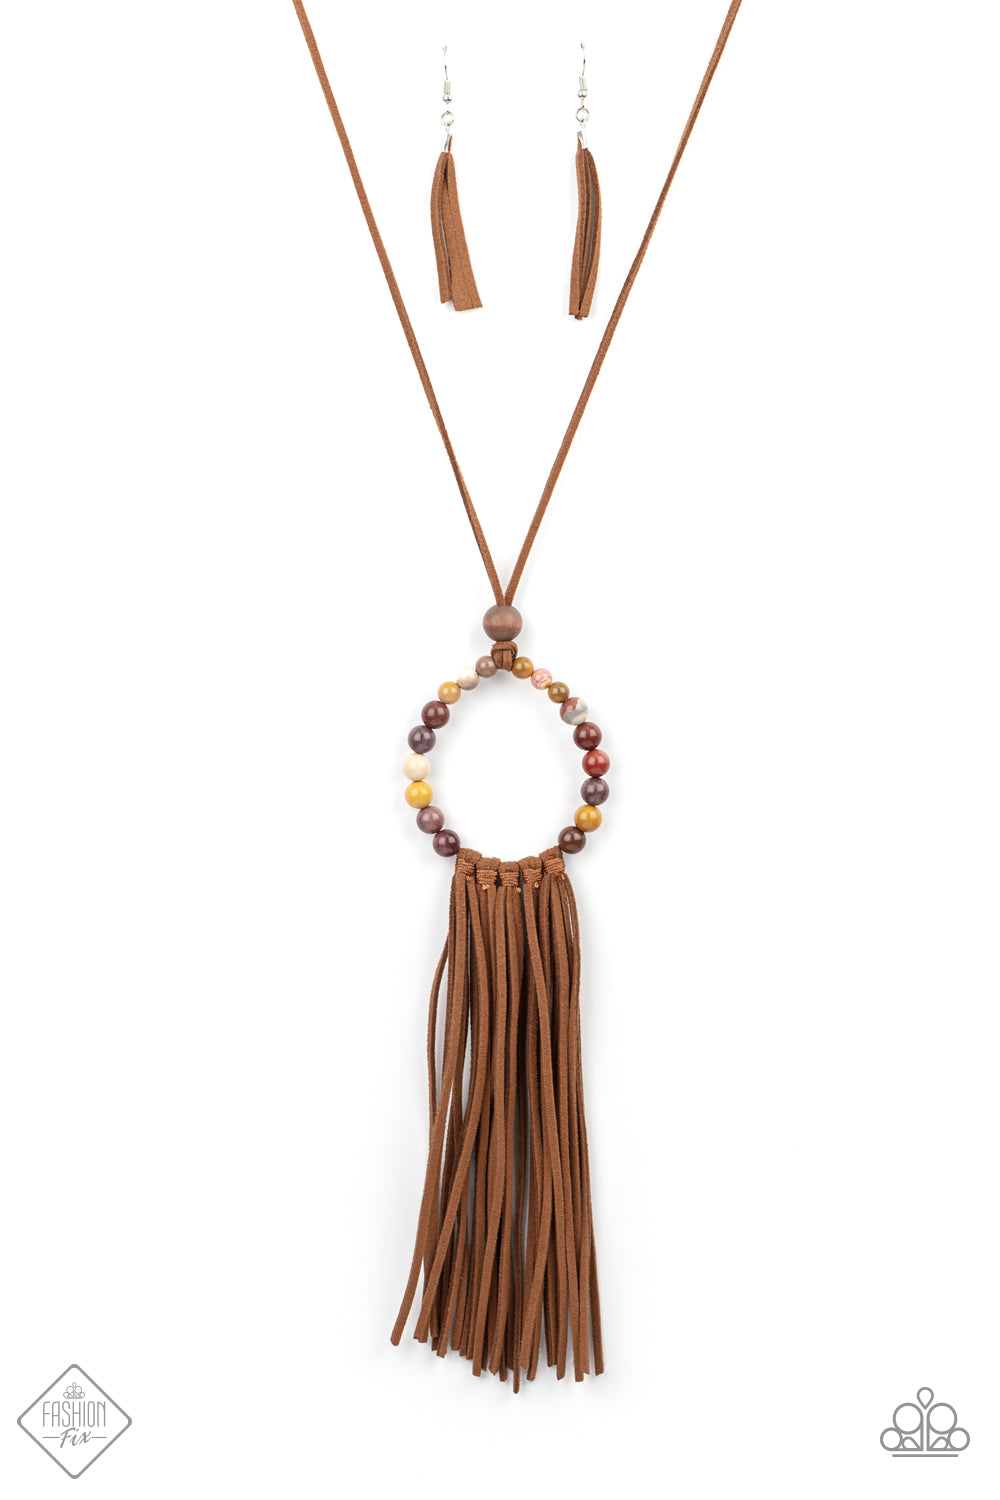 Namaste Mama - Multi Stone Bead Necklaces - Paparazzi Accessories a collection of earthy multicolored stone beads are threaded around a wire hoop that is fastened at the end of a lengthened brown suede cord. The earthy stones make way for a foxy fringe of brown suede that sways from the bottom of the hoop, resulting in a rustic down-to-earth vibe. Features an adjustable clasp closure.